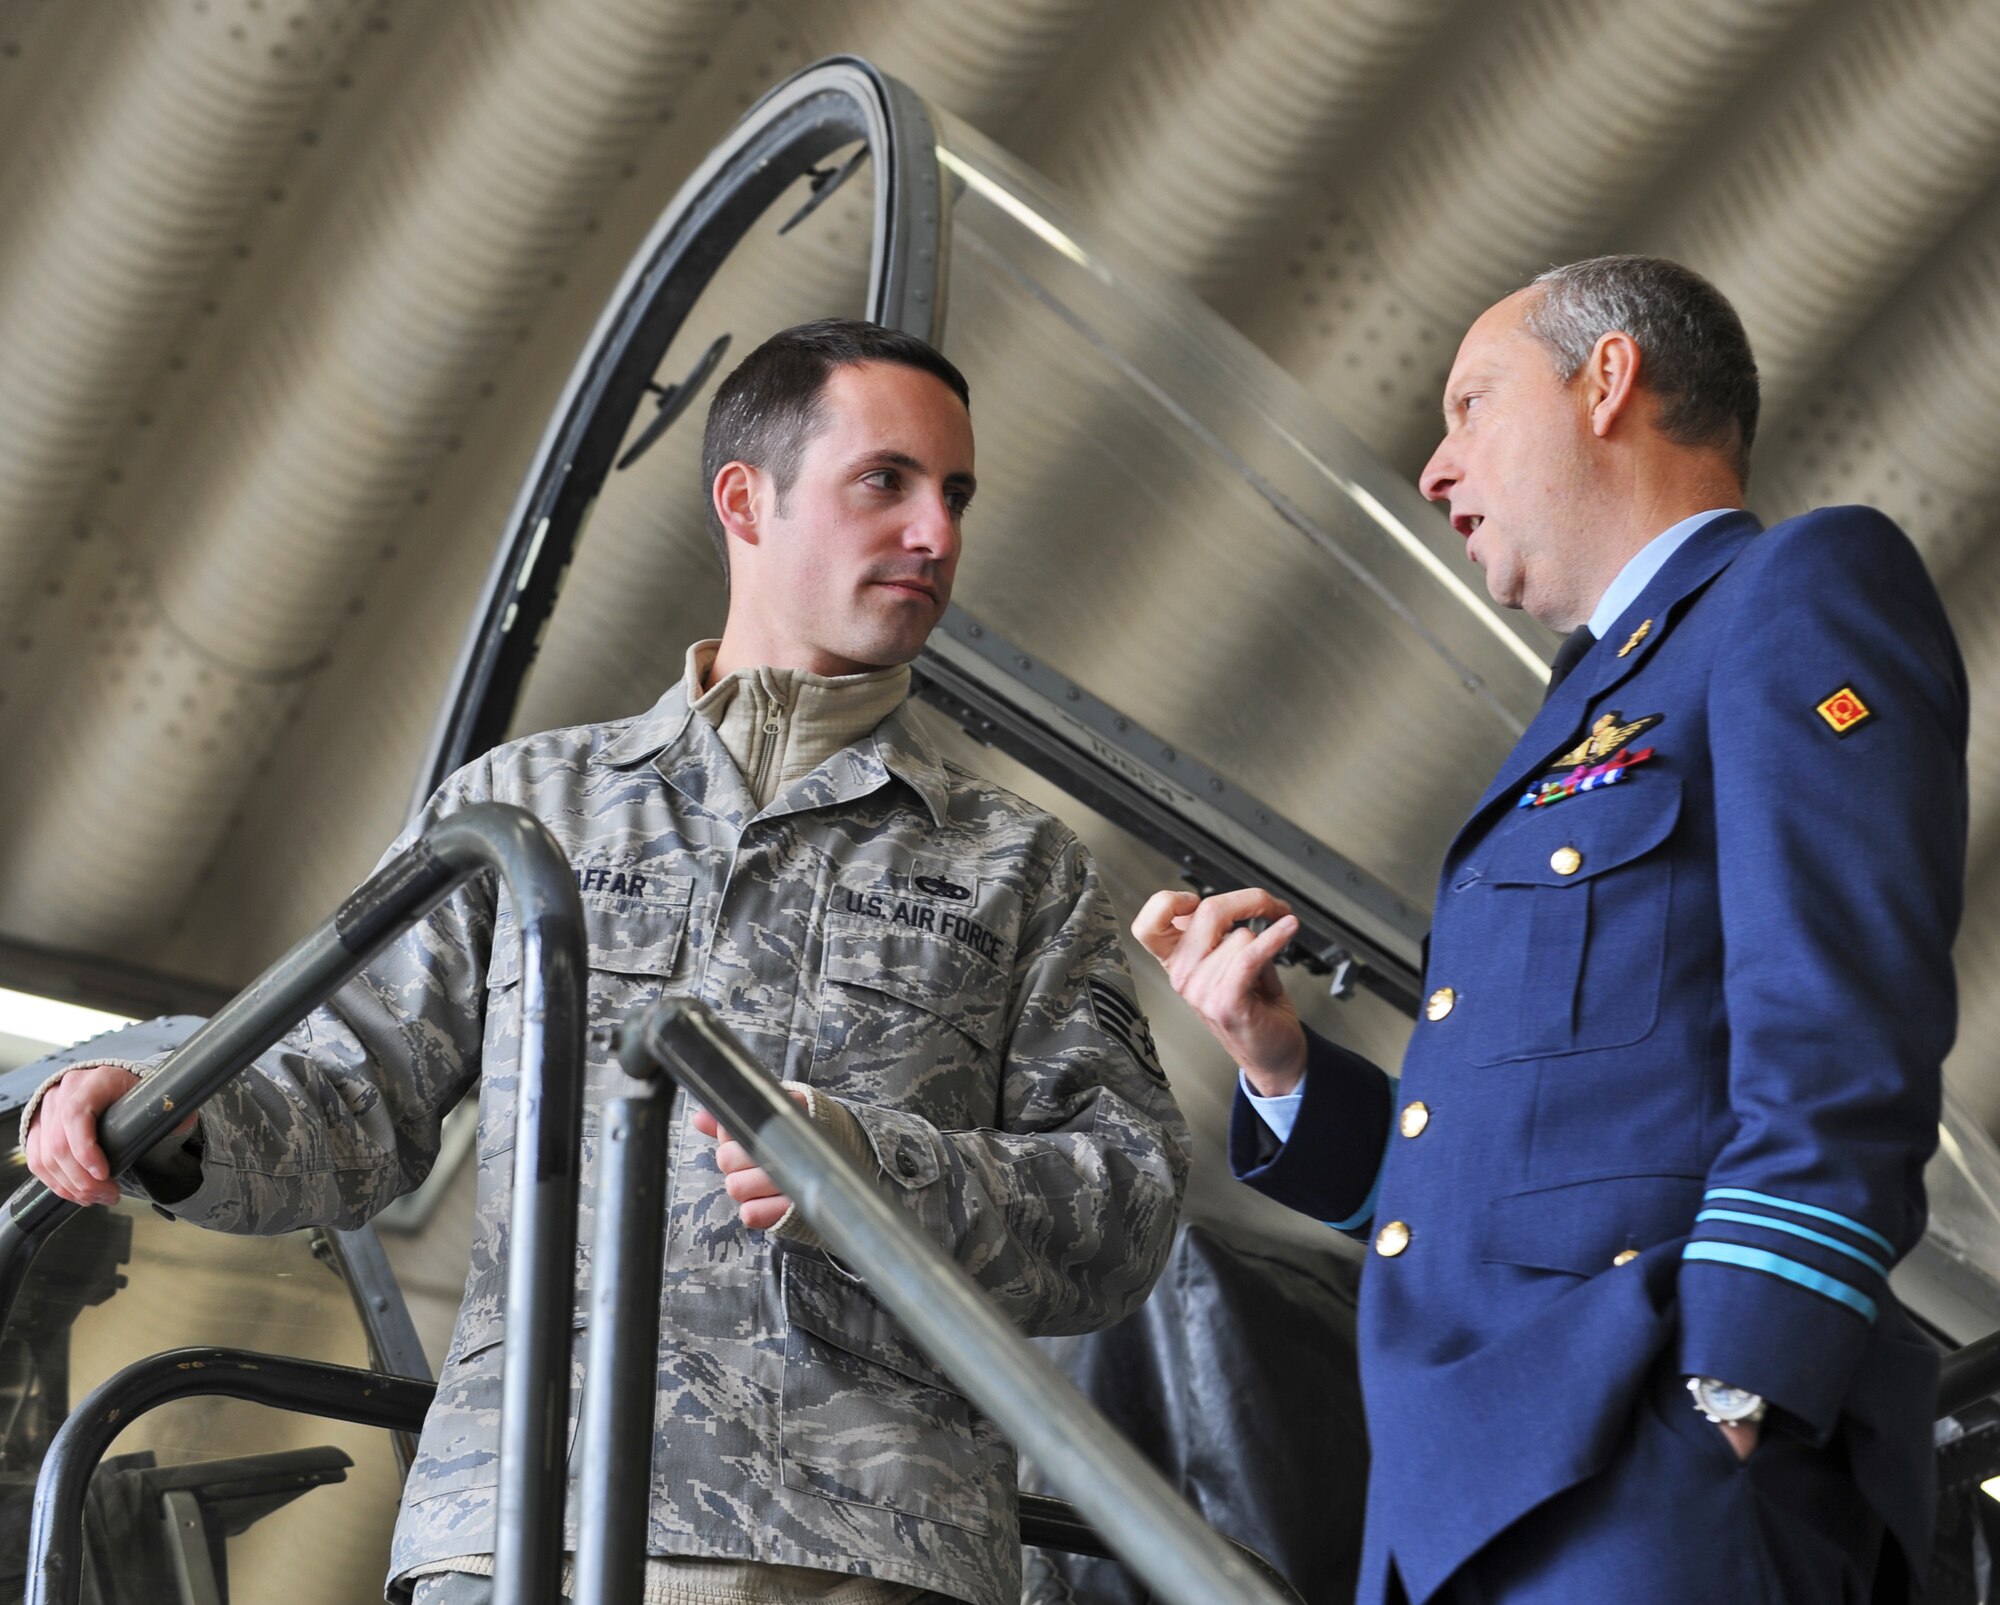 SPANGDAHLEM AIR BASE, Germany – Staff Sgt. Jesse Swaffar, 52nd Aircraft Maintenance Squadron avionics specialist, speaks to Lt. Col. Chris Goossens, Belgian Defense College instructor, about new features and upgrades to the A-10 Thunderbolt II Oct 28. Belgian Defense College members visited the base to get a better insight to how our people and aircraft support the warfighters within the Air Expeditionary Force concept. (U.S. Air Force photo/Senior Airman Nick Wilson)